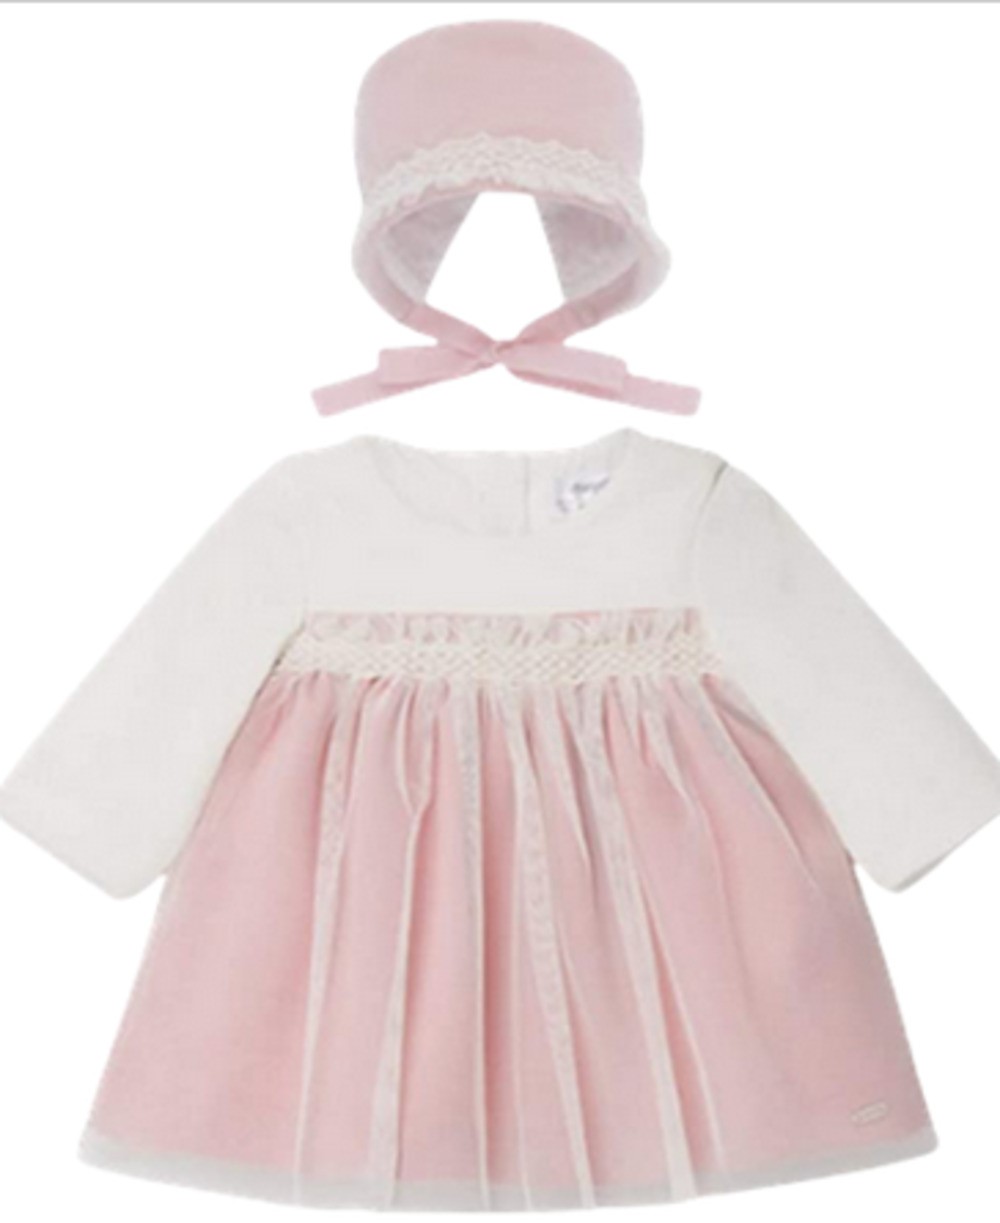 MAYORAL 2864 BABY GIRLS' PINK AND IVORY DRESS WITH TULLE OVERLAY AND MATCHING BONNET